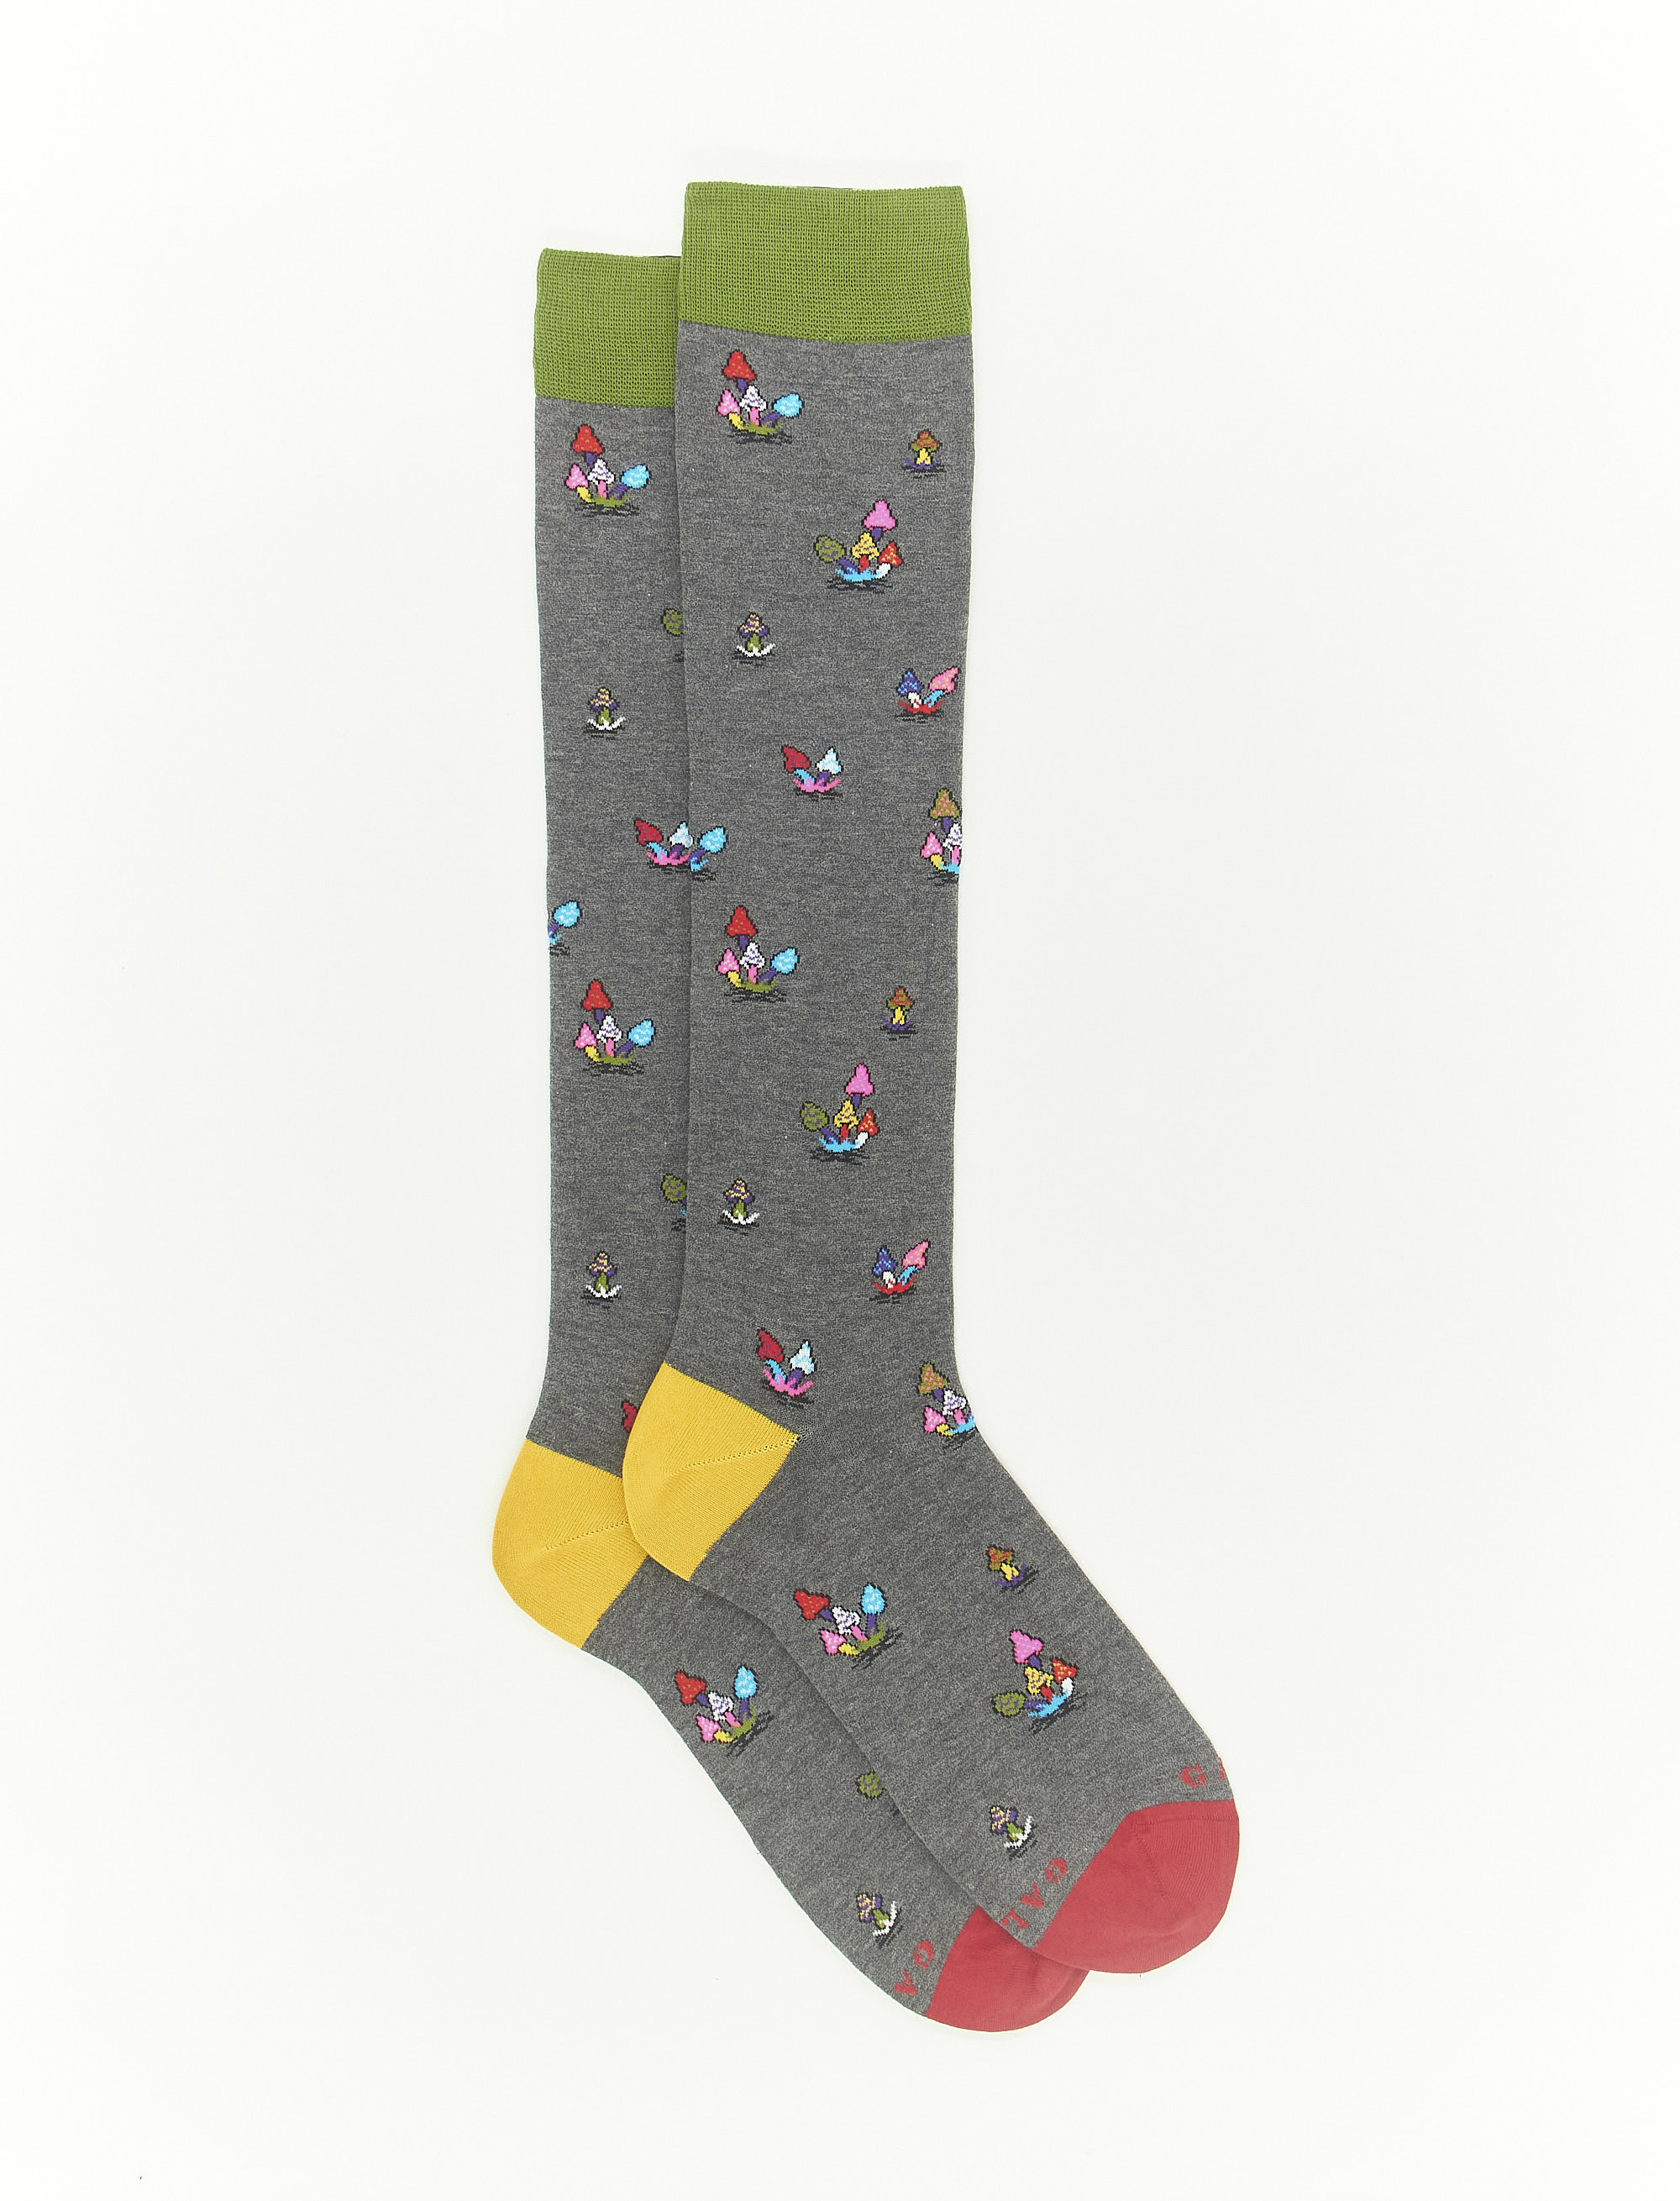 Women's long iron grey light cotton socks with mushroom motif - The FW Edition | Gallo 1927 - Official Online Shop